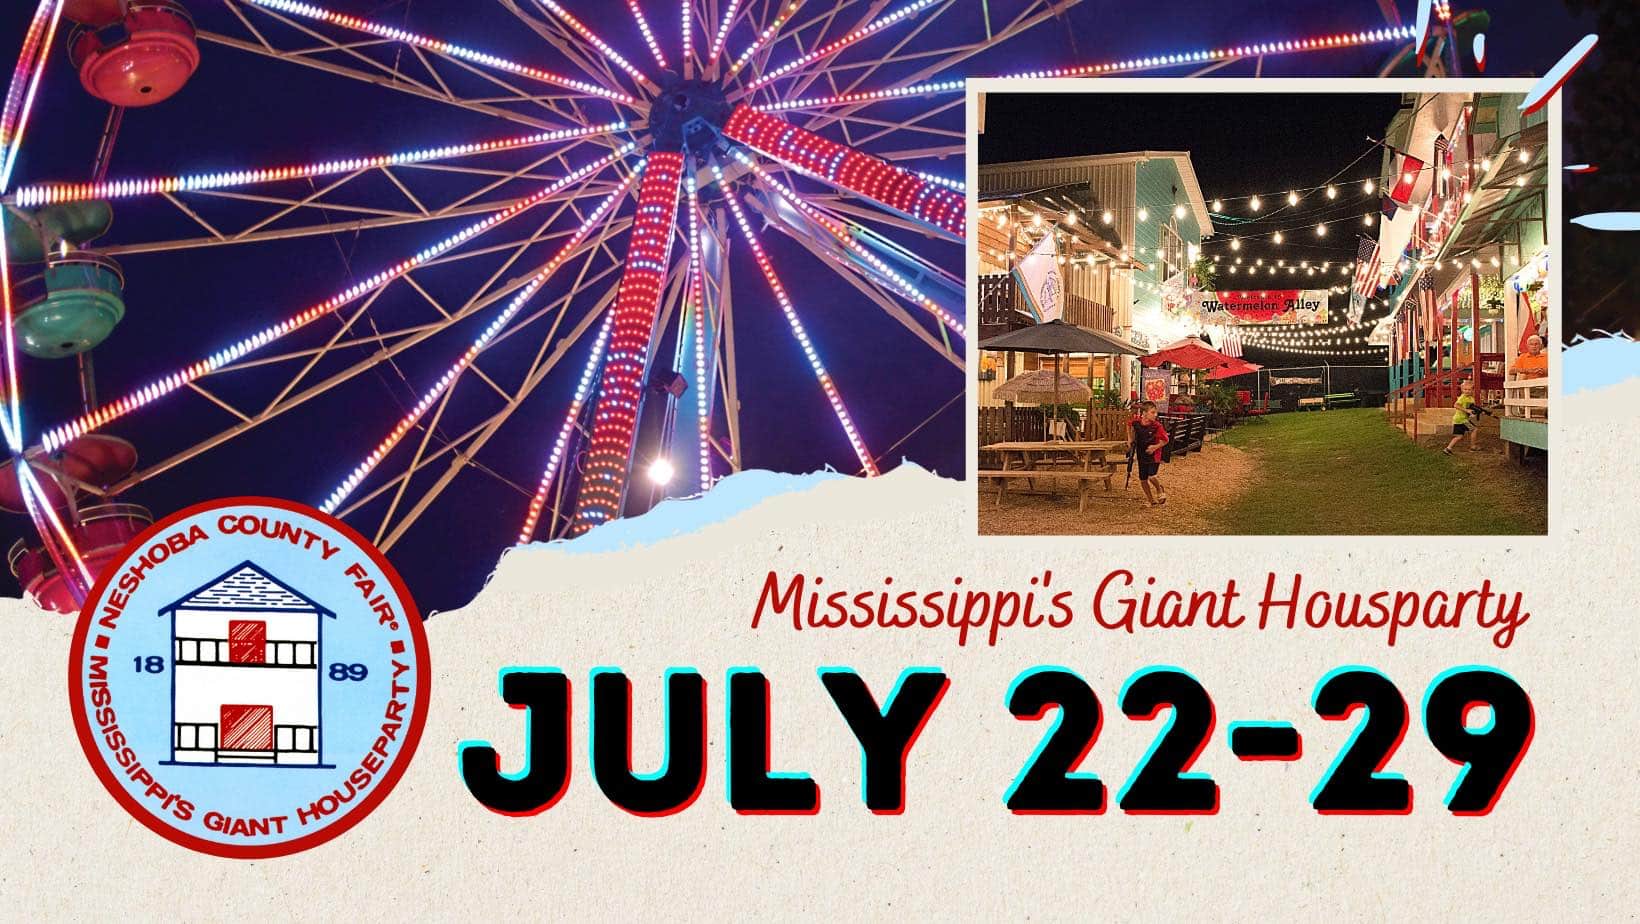 Neshoba County Fair Here's the schedule for Mississippi's Giant